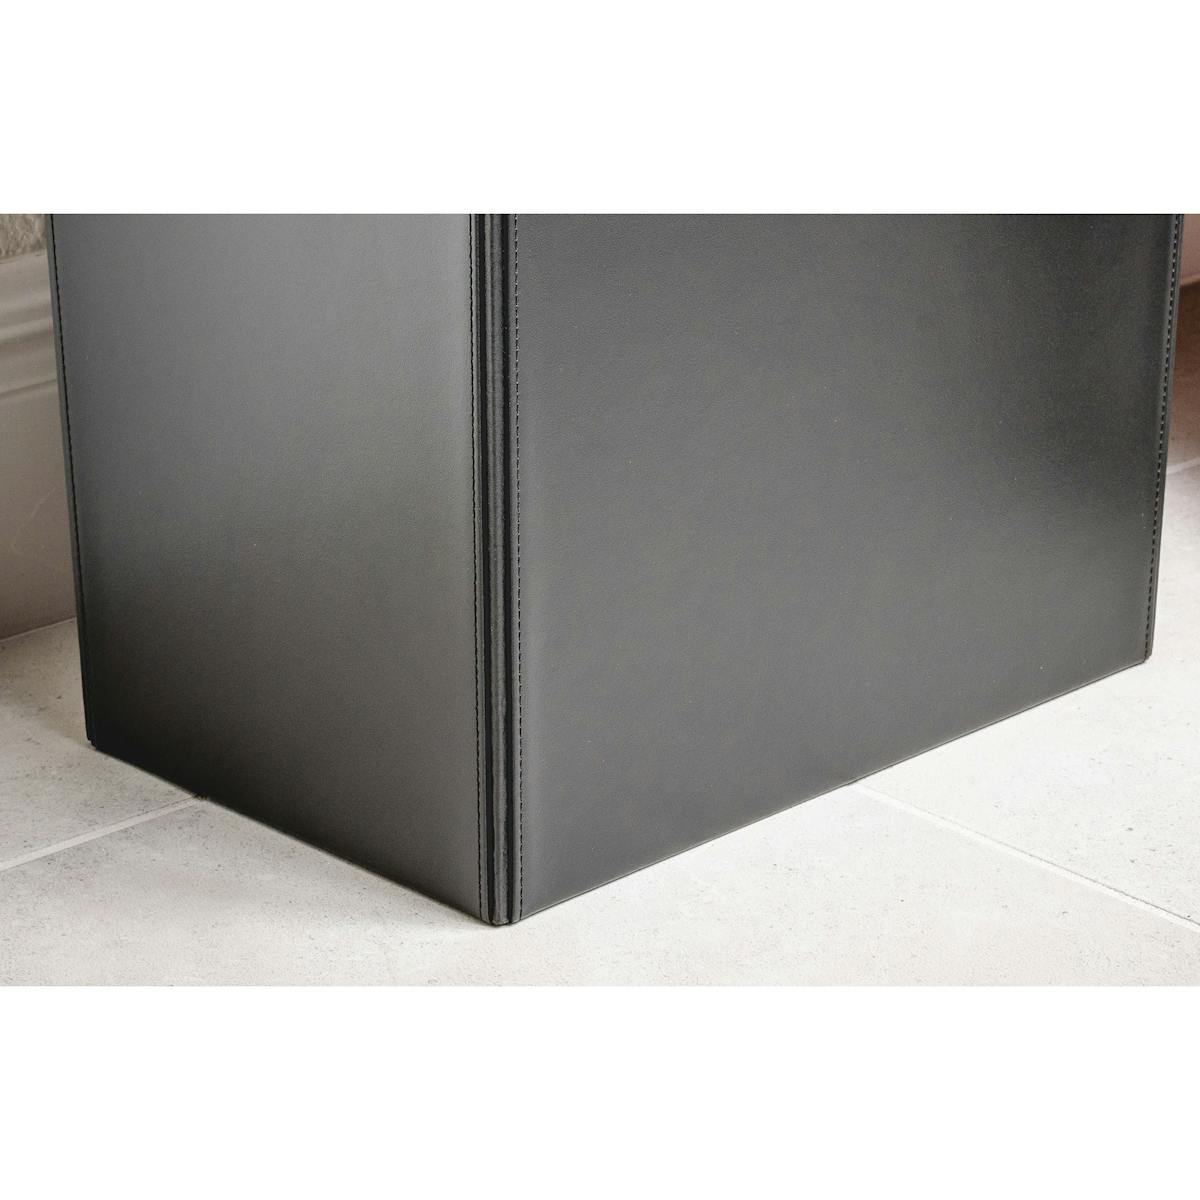 Classic Black Leather Square Waste Basket – dacasso-inc